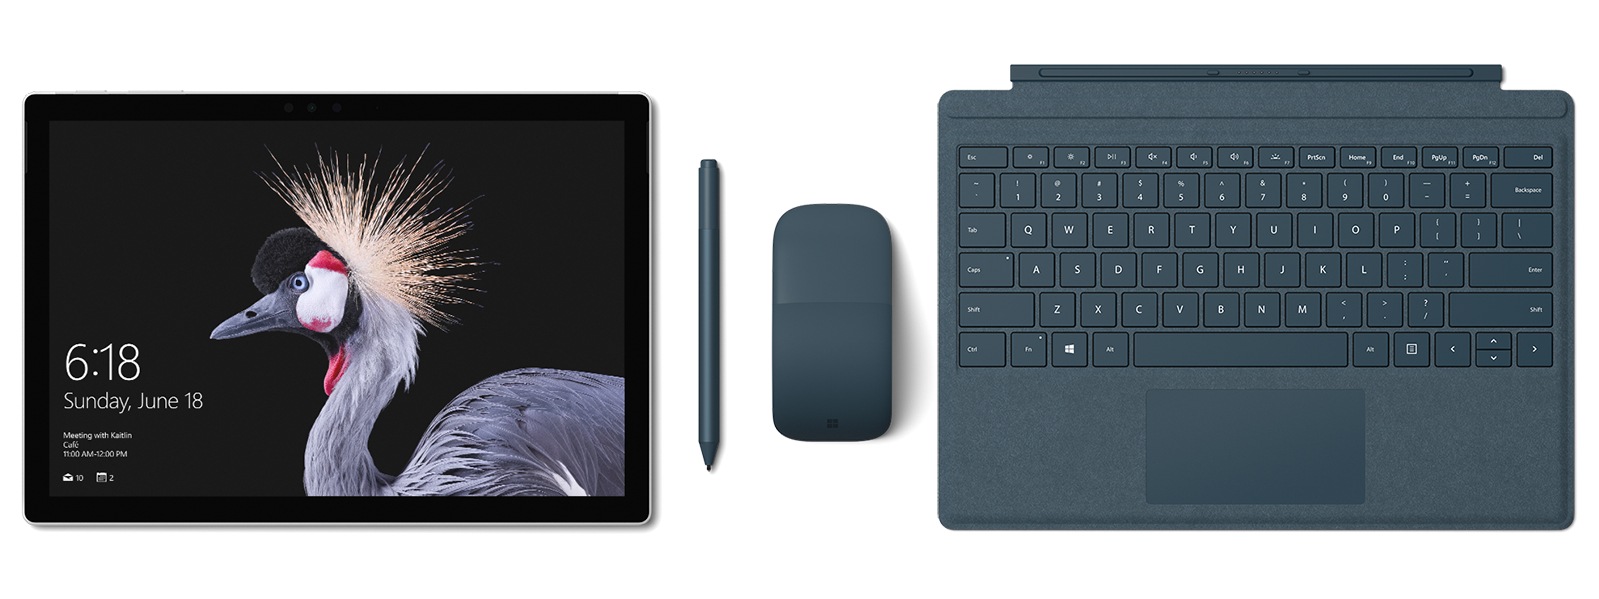 Surface Pro, mouse, keyboard, and blue type cover